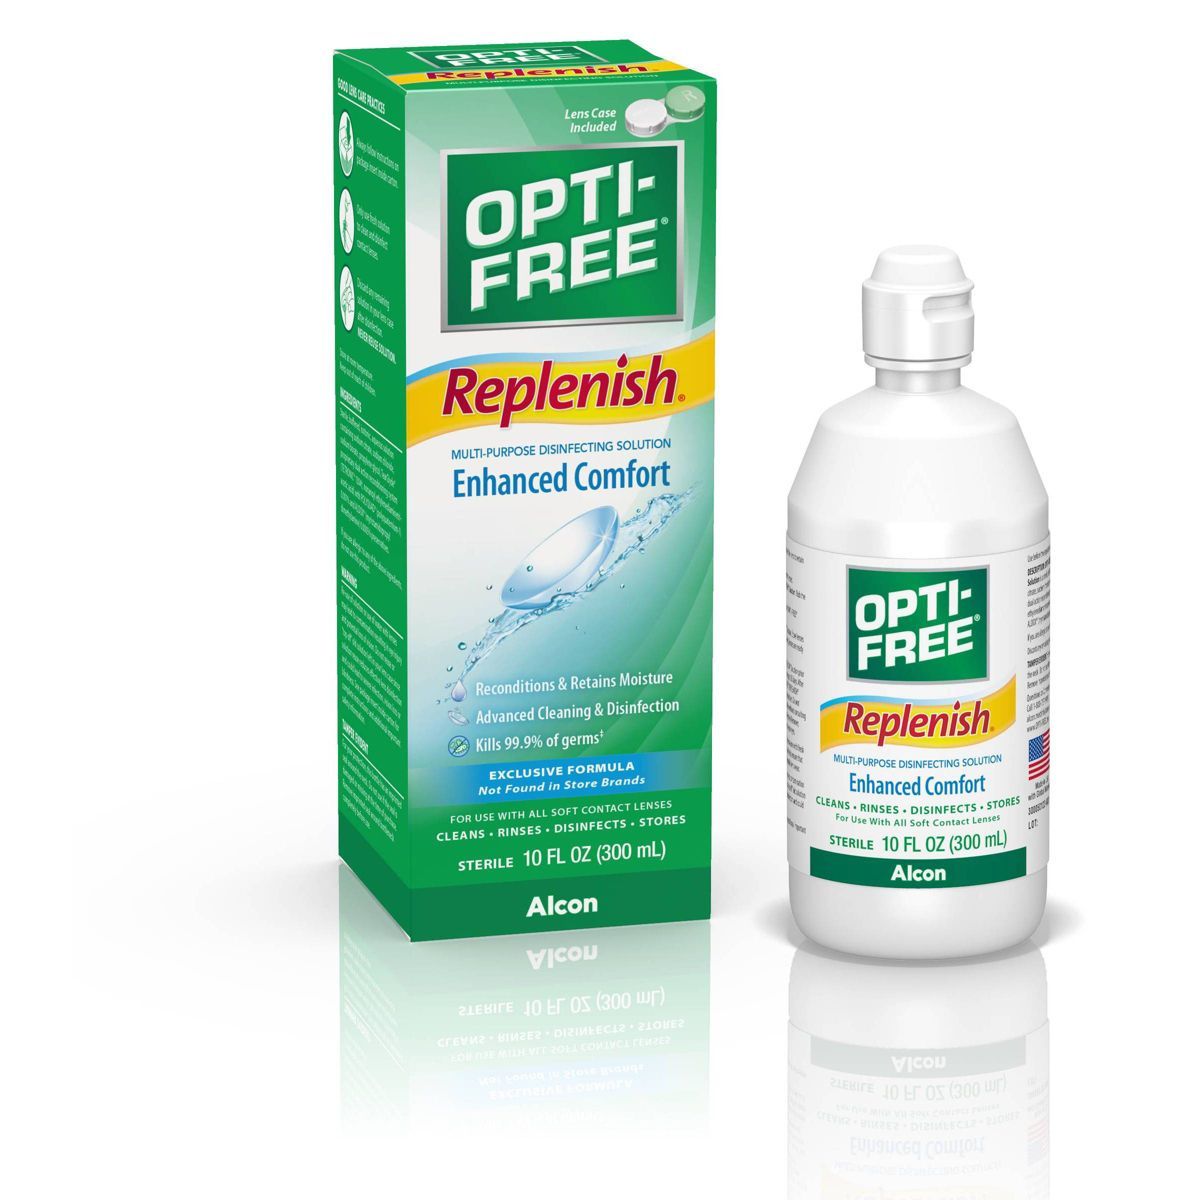 Replenish Opti-Free Multi-Purpose Disinfecting Solution for Contact Lens | Target